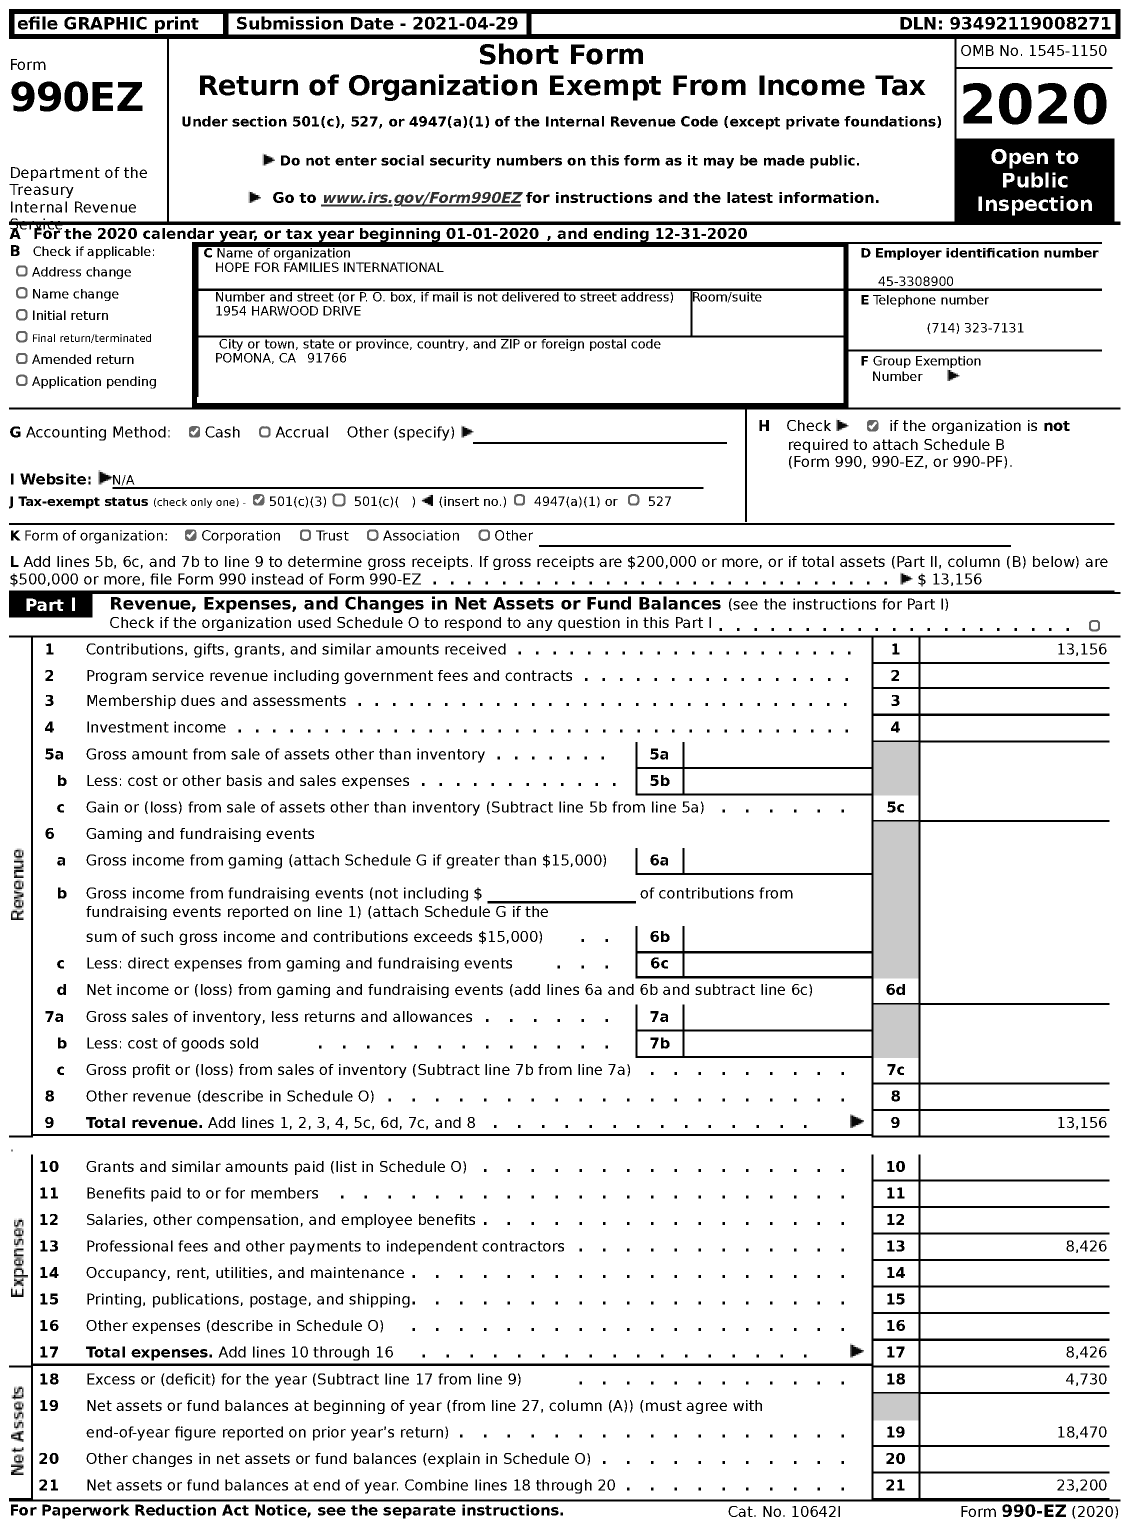 Image of first page of 2020 Form 990EZ for Hope for Families International